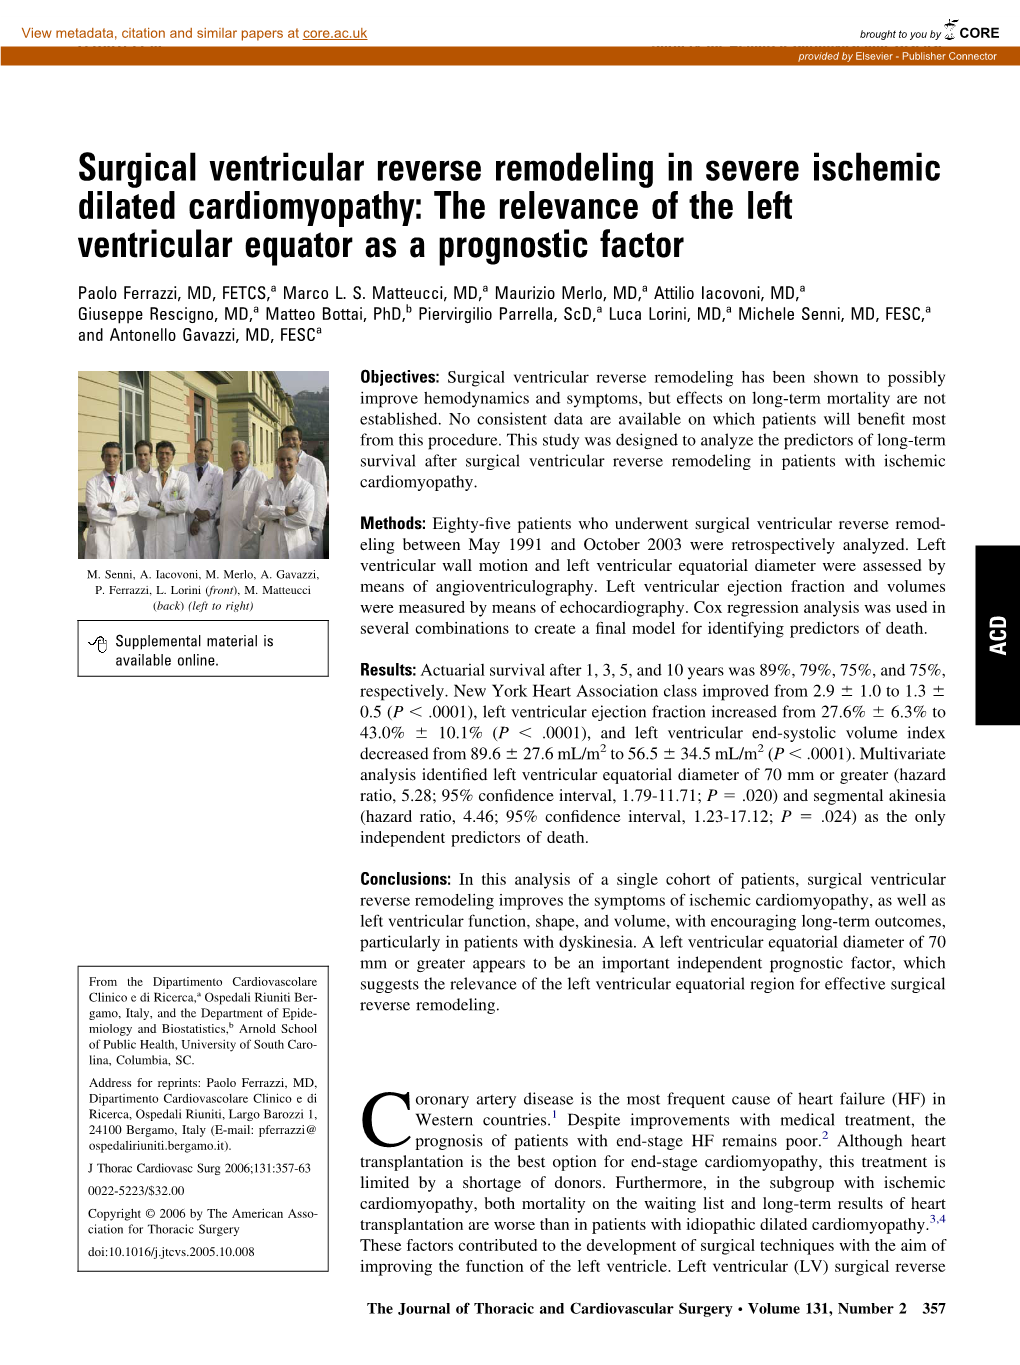 Surgical Ventricular Reverse Remodeling in Severe Ischemic Dilated Cardiomyopathy: the Relevance of the Left Ventricular Equator As a Prognostic Factor